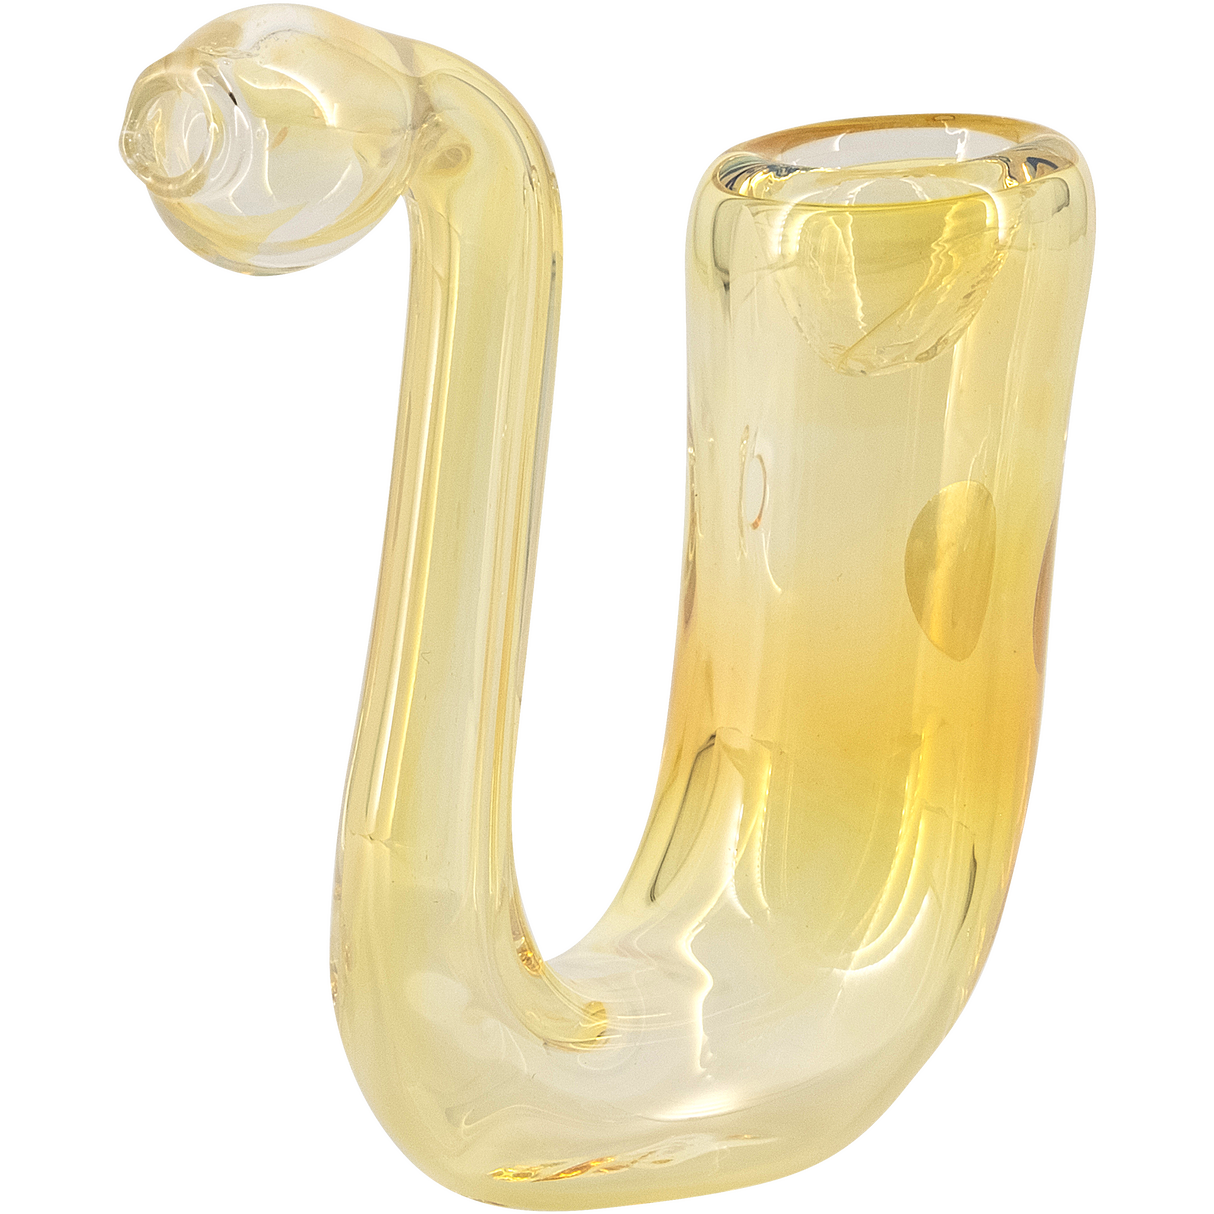 LA Pipes "Calabash" Fumed Glass Sherlock Hand Pipe, Color Changing, 4" Tall